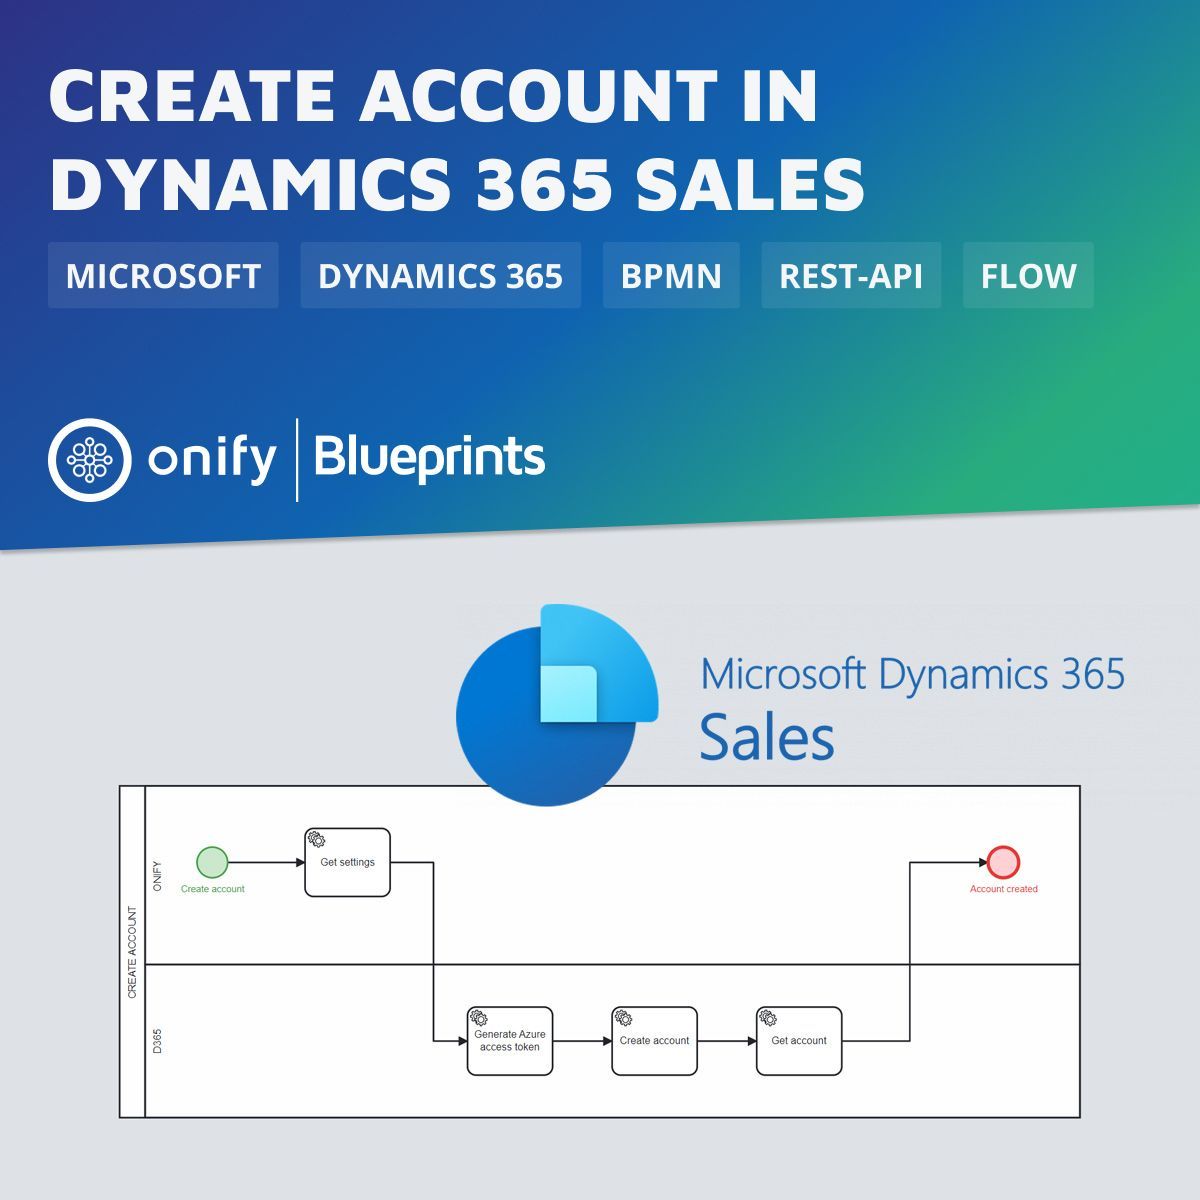 Onify Blueprint – Create account in Dynamics 365 Sales